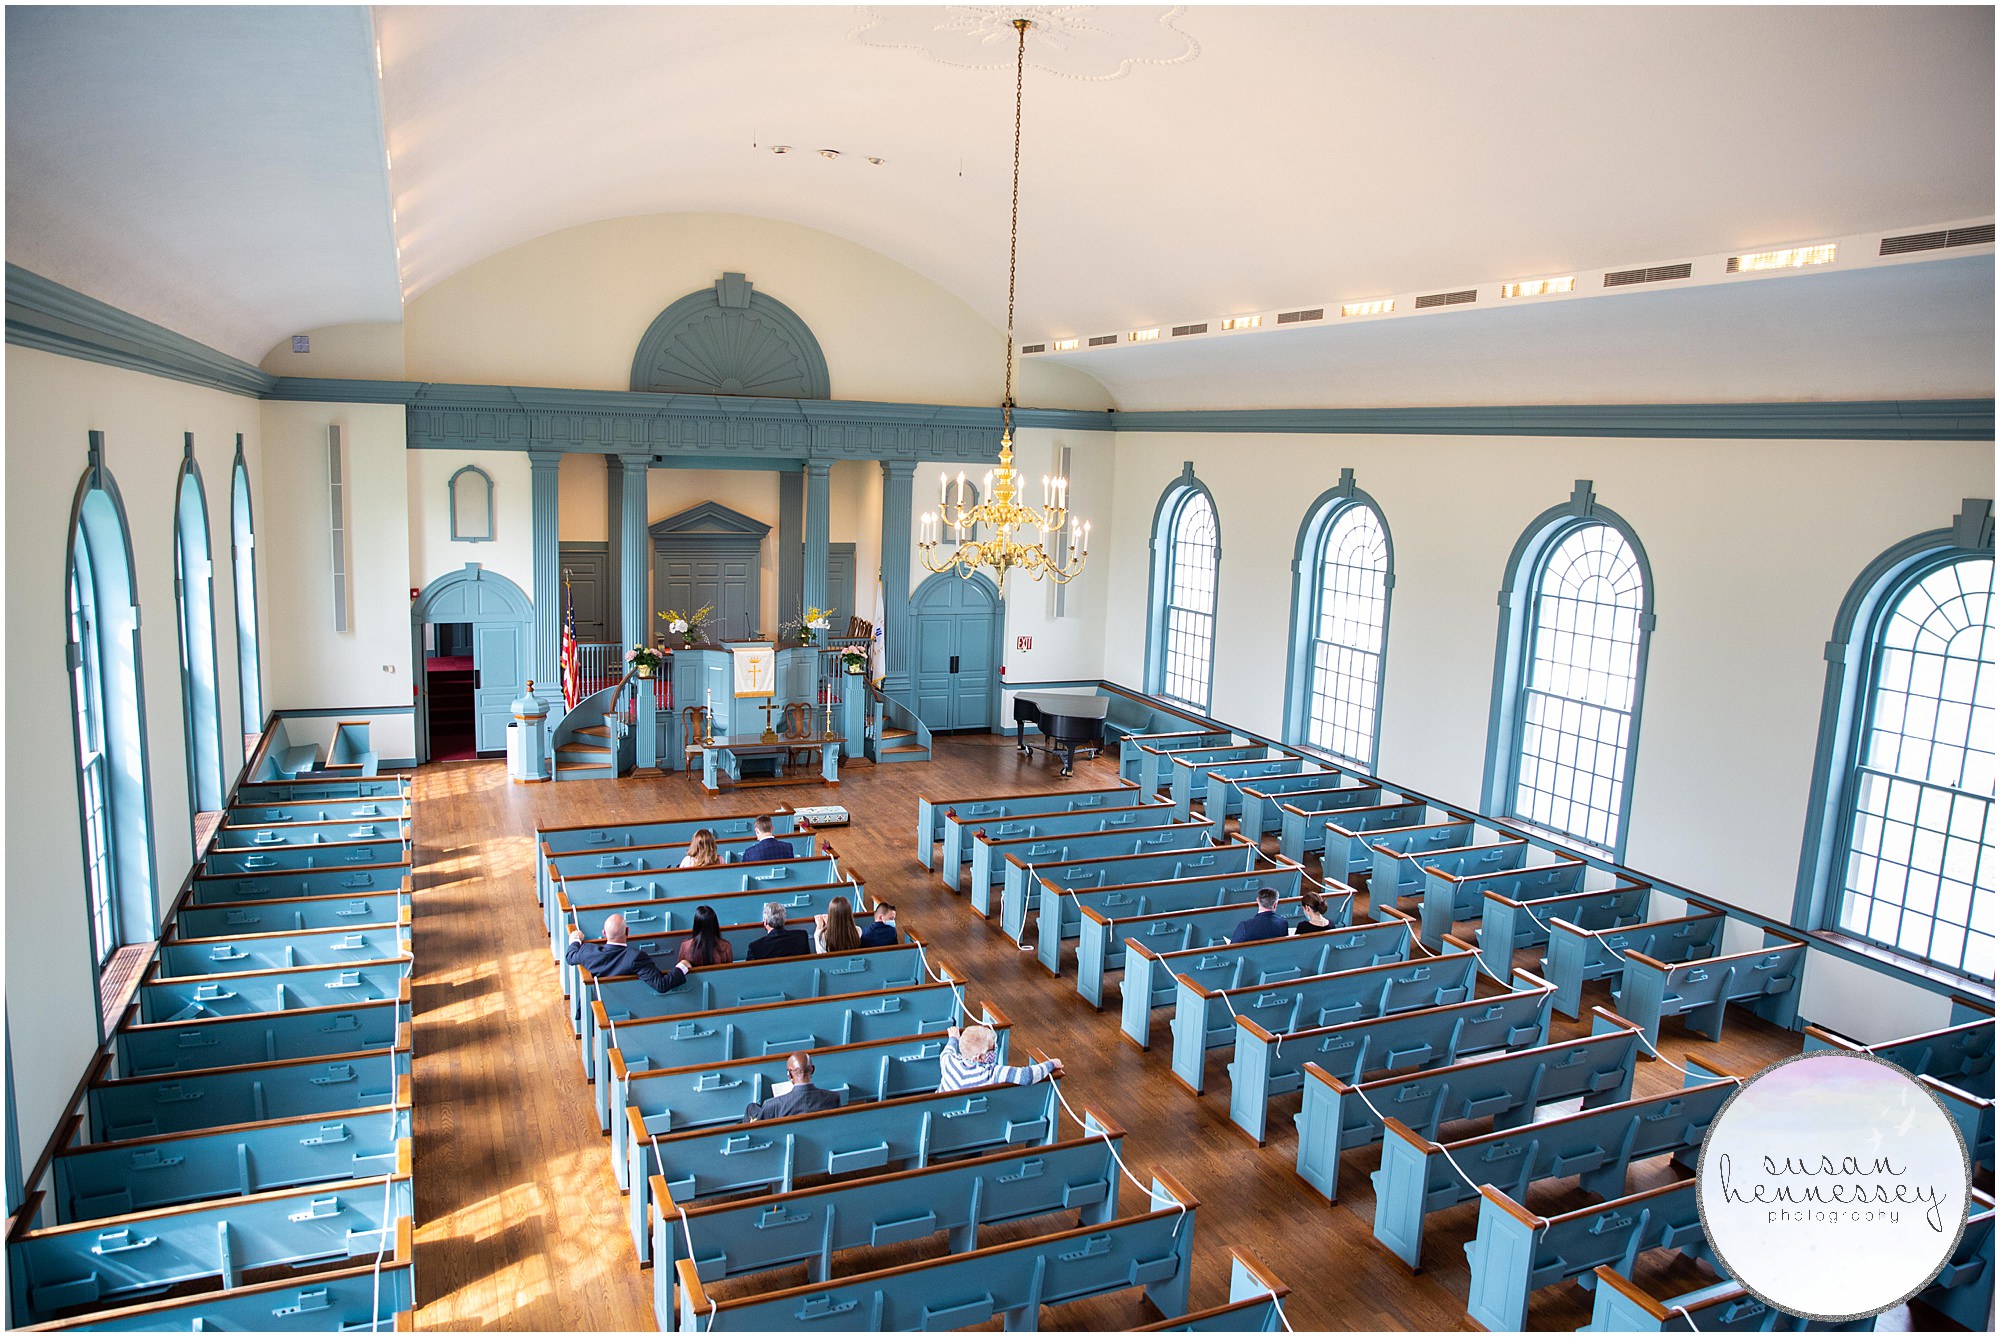 Planning a Micro Wedding? The First Presbyterian Church of Moorestown is the perfect location to get married. 